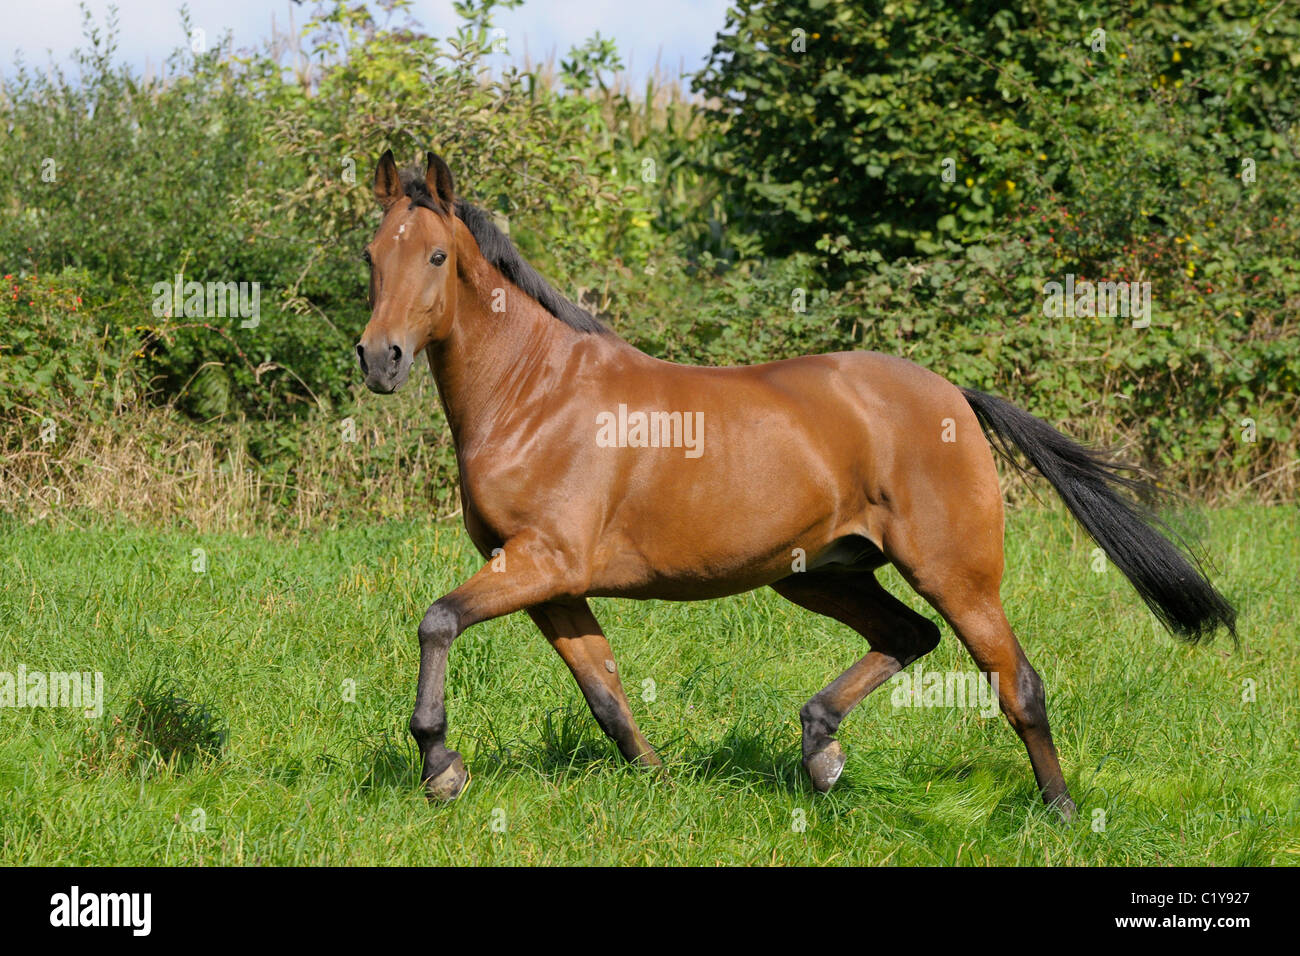 American Standardbred horse on meadow Stock Photo